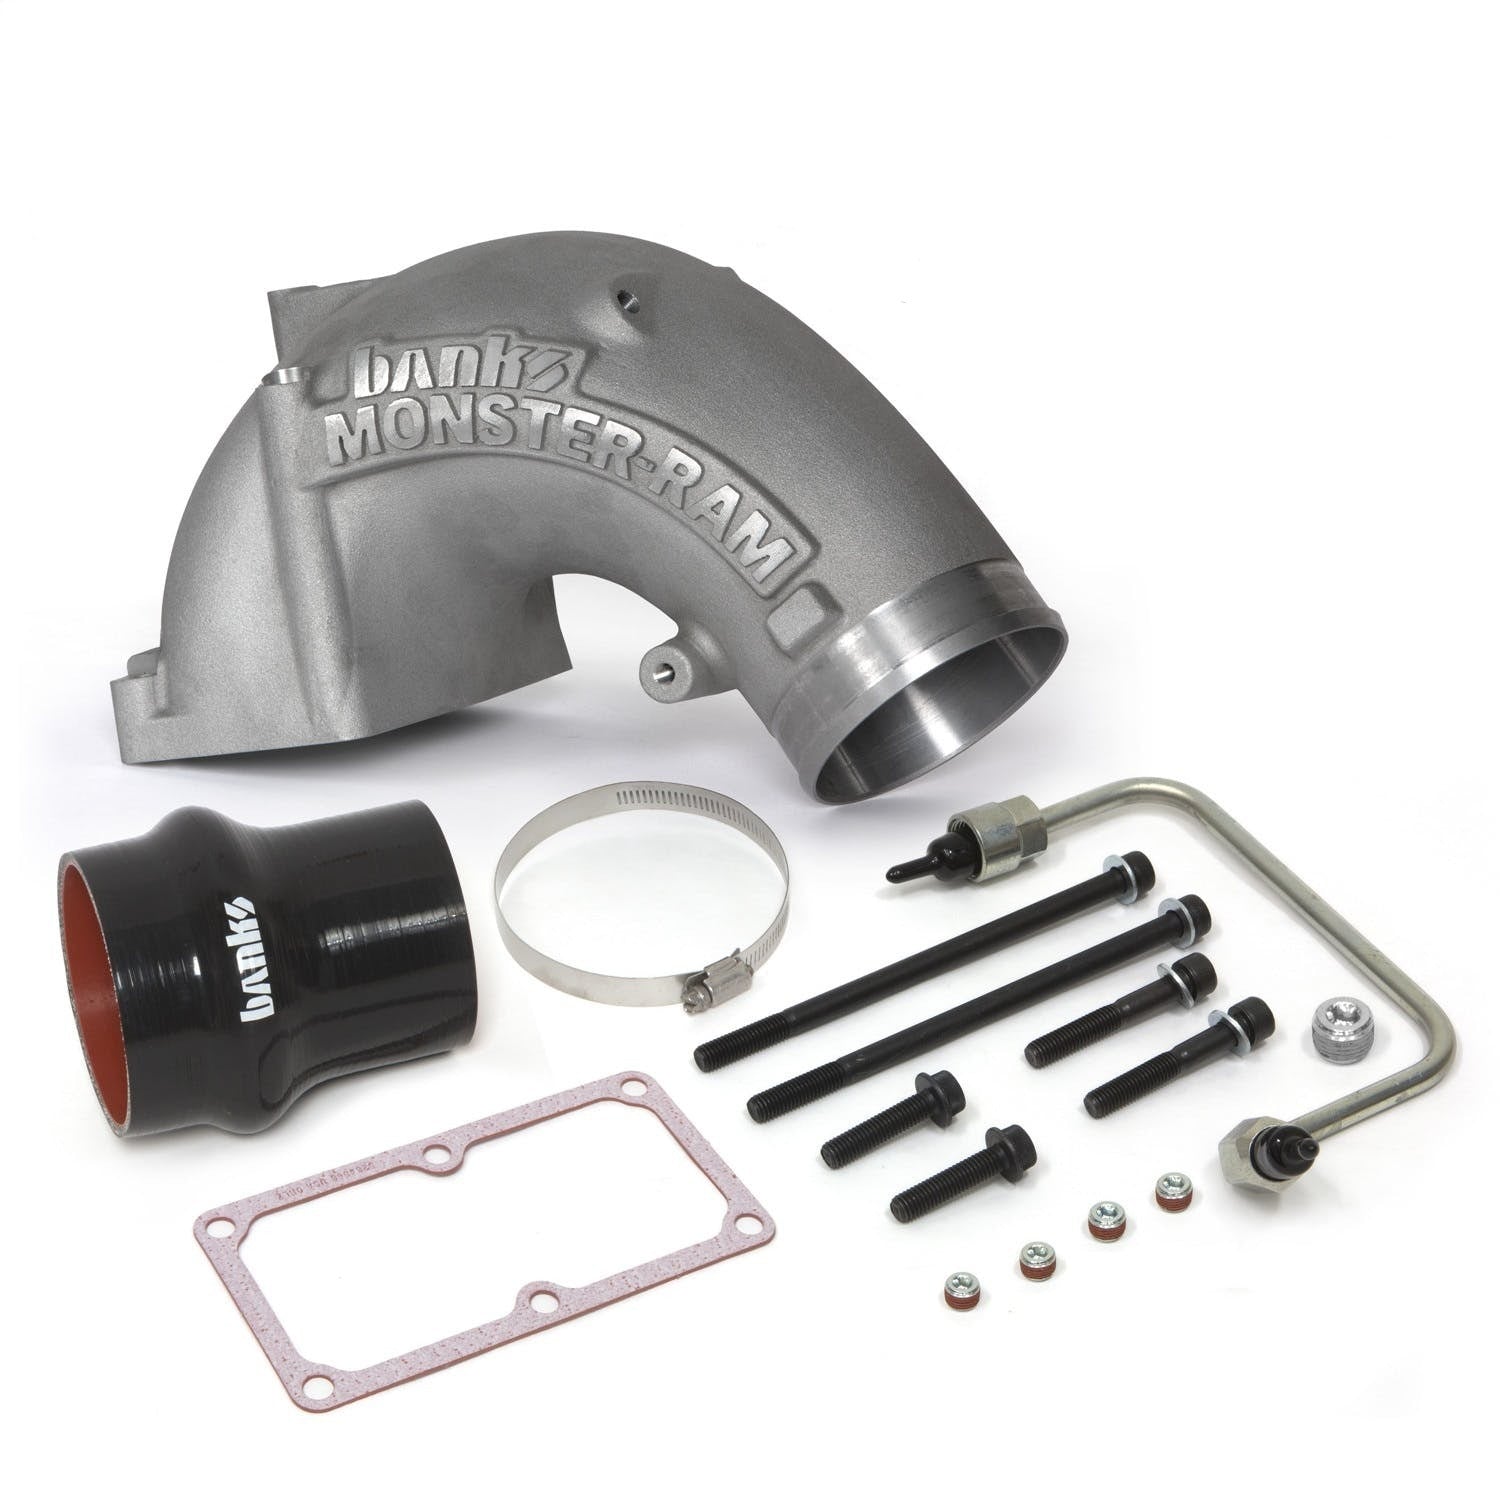 Banks Power 42790 Monster-Ram Intake Elbow Kit with Fuel Line and Hump Hose, 4 inch Natural